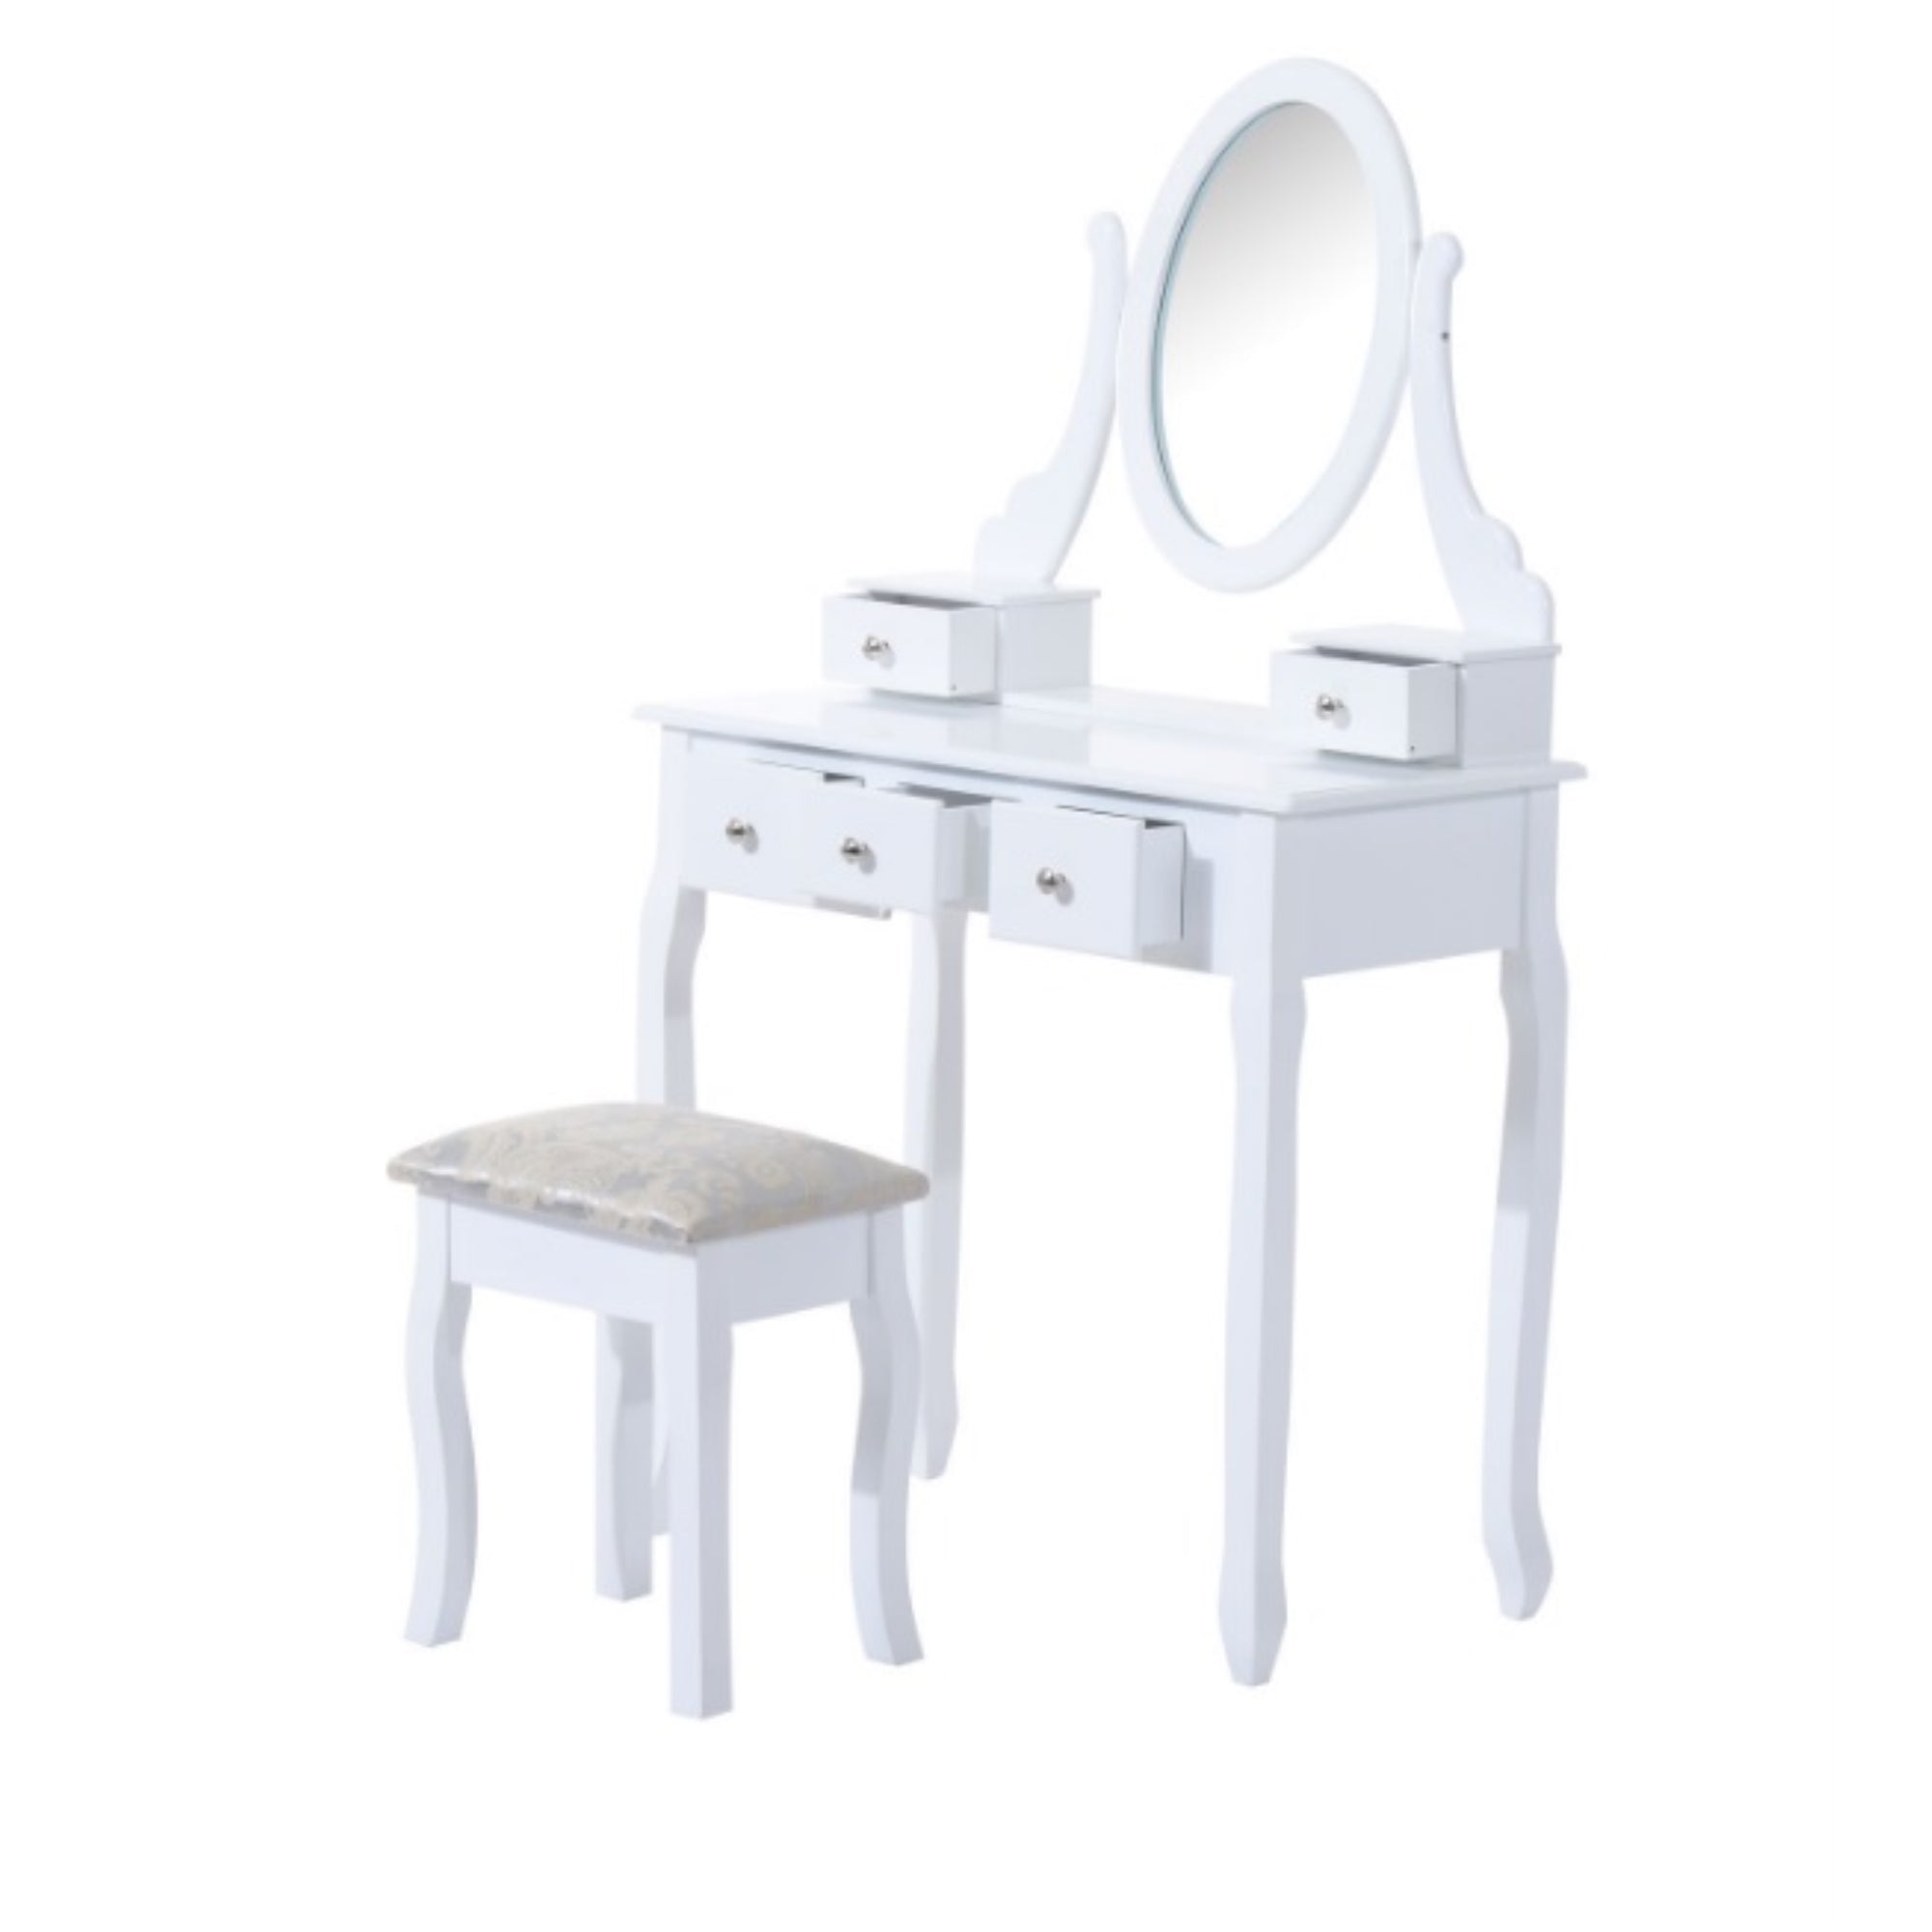 ViscoLogic IVORY Wooden Mirrored Makeup Vanity Table (White)